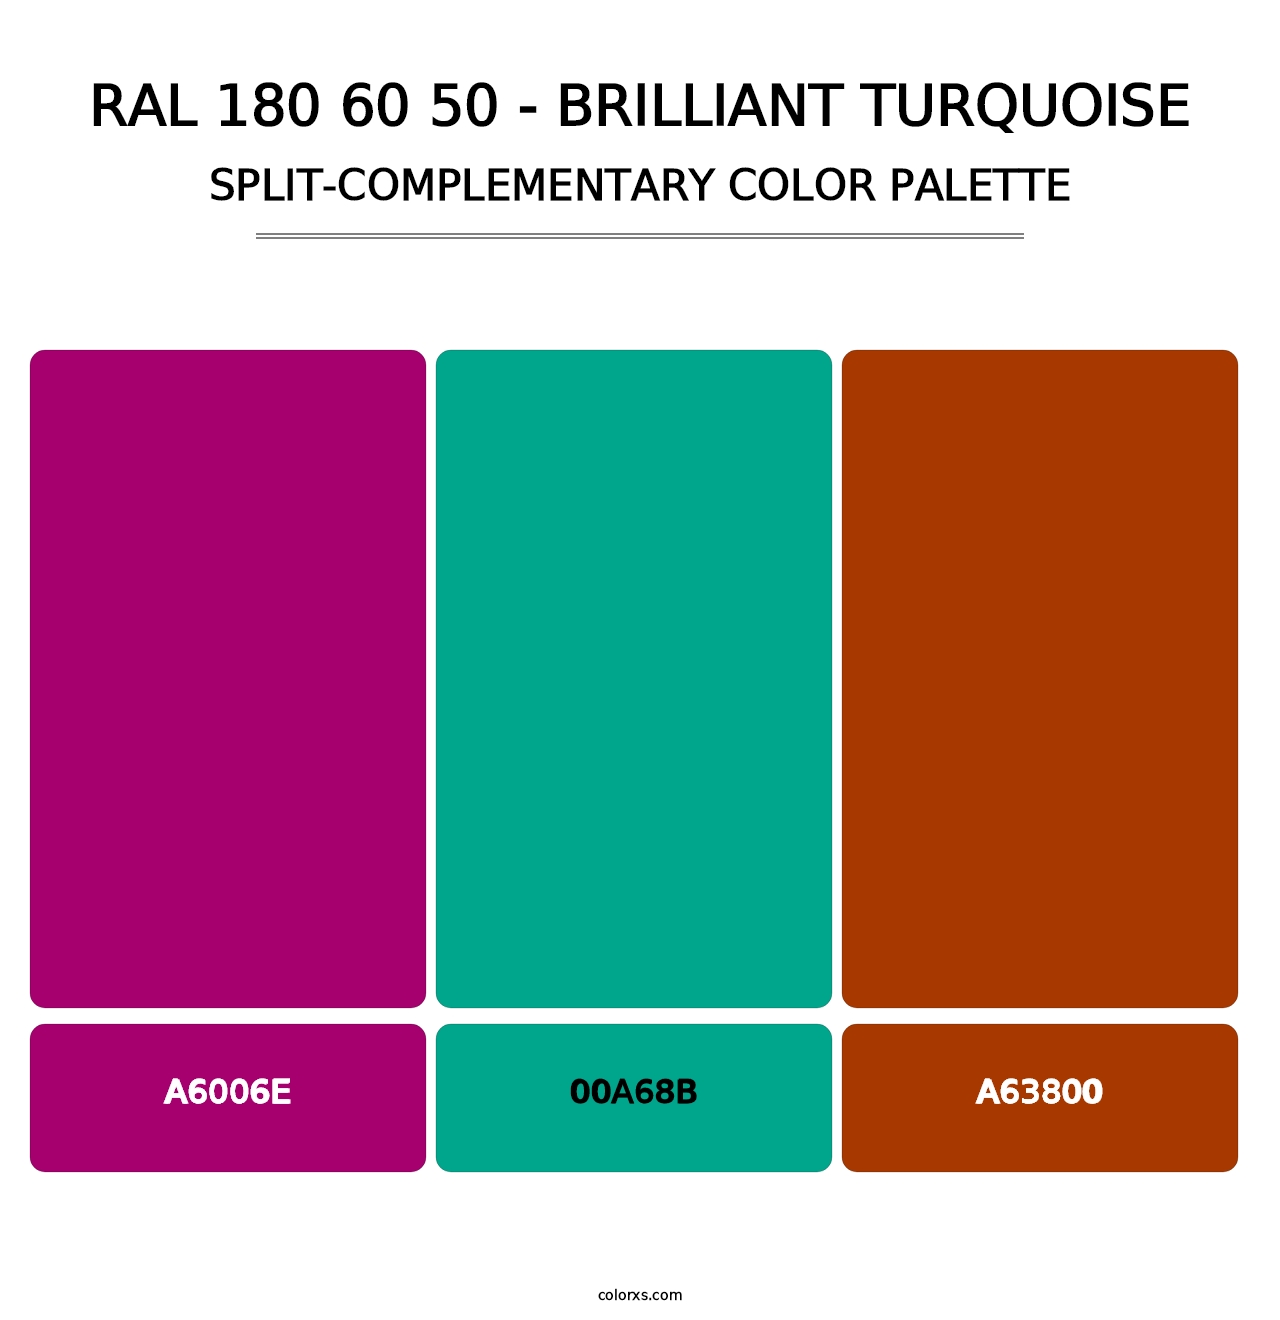 RAL 180 60 50 - Brilliant Turquoise - Split-Complementary Color Palette